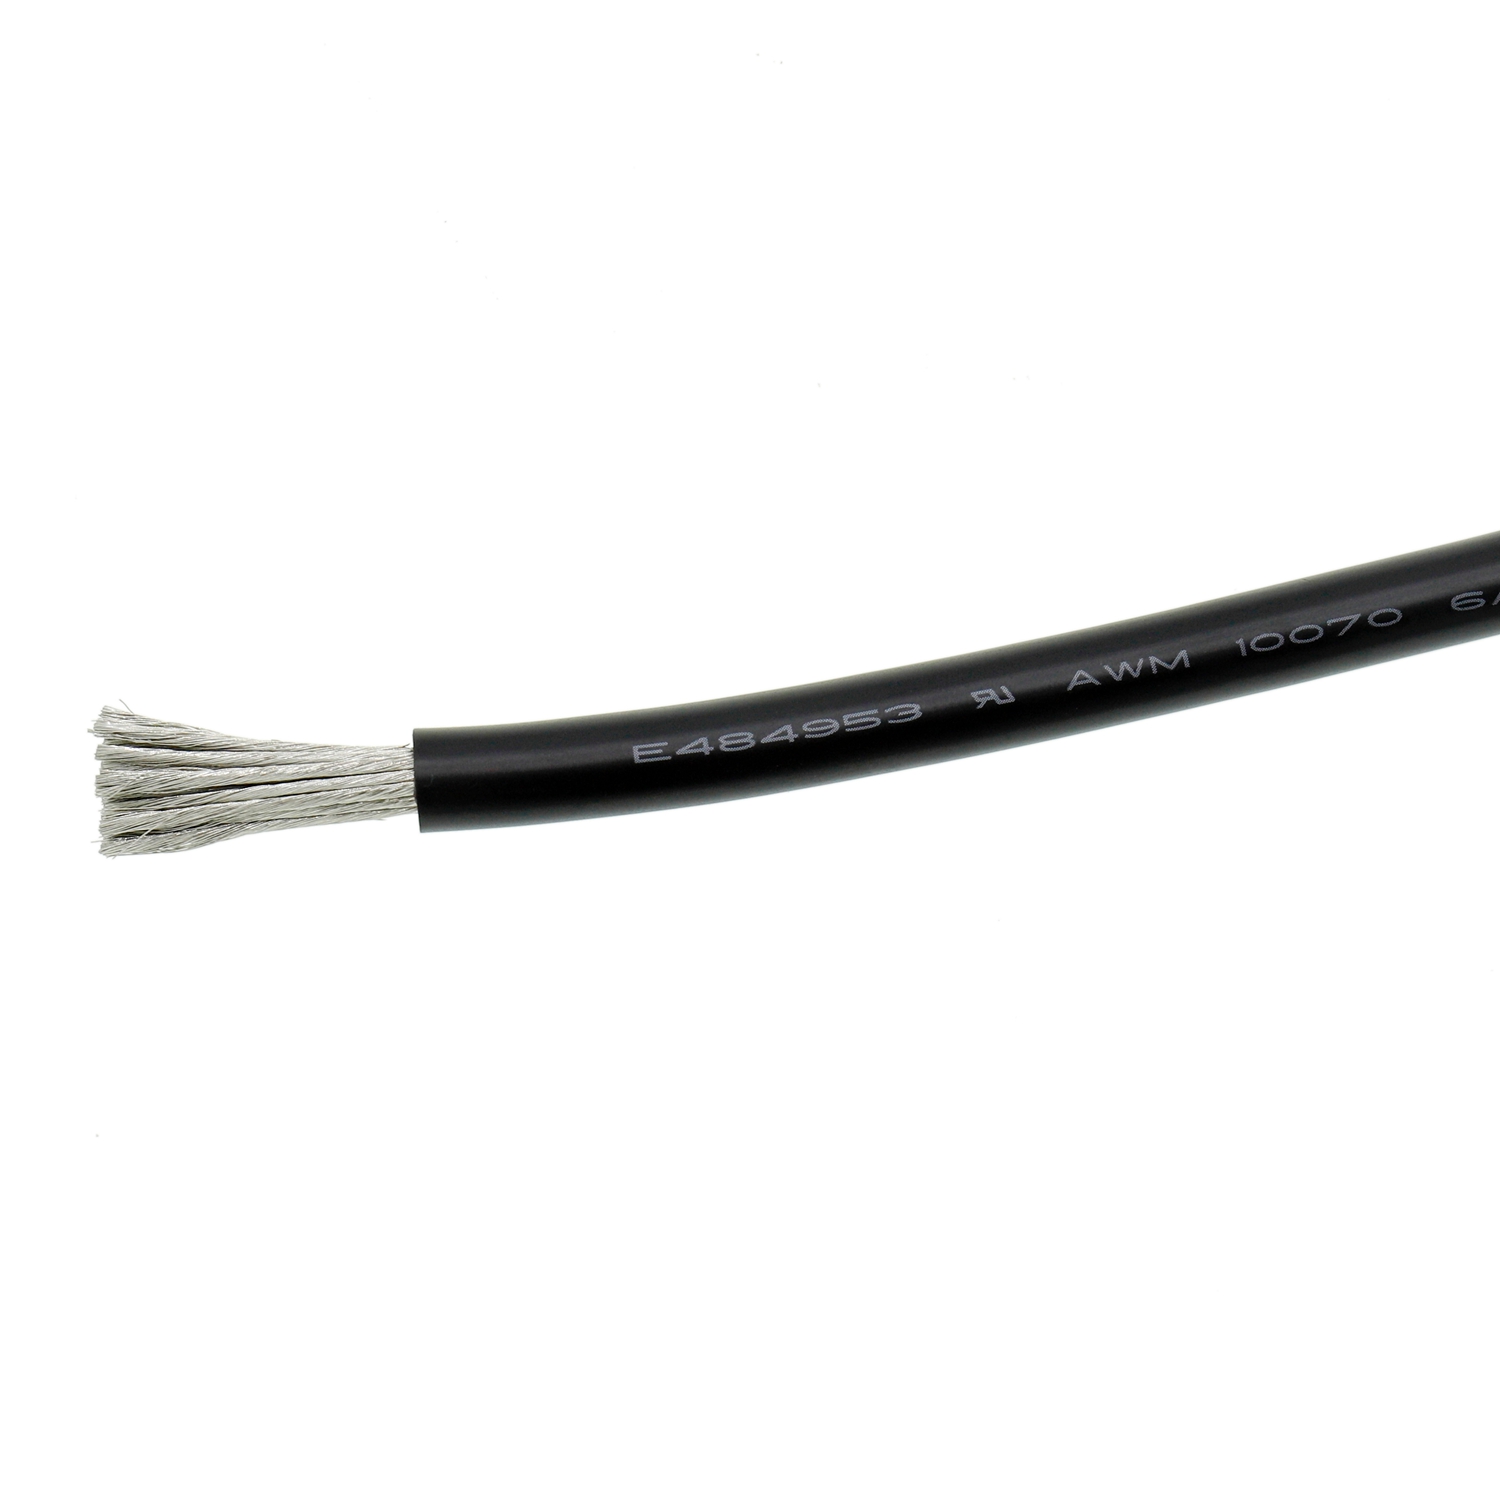 UL10070 Power Cable Extra Flexible AWM Wire